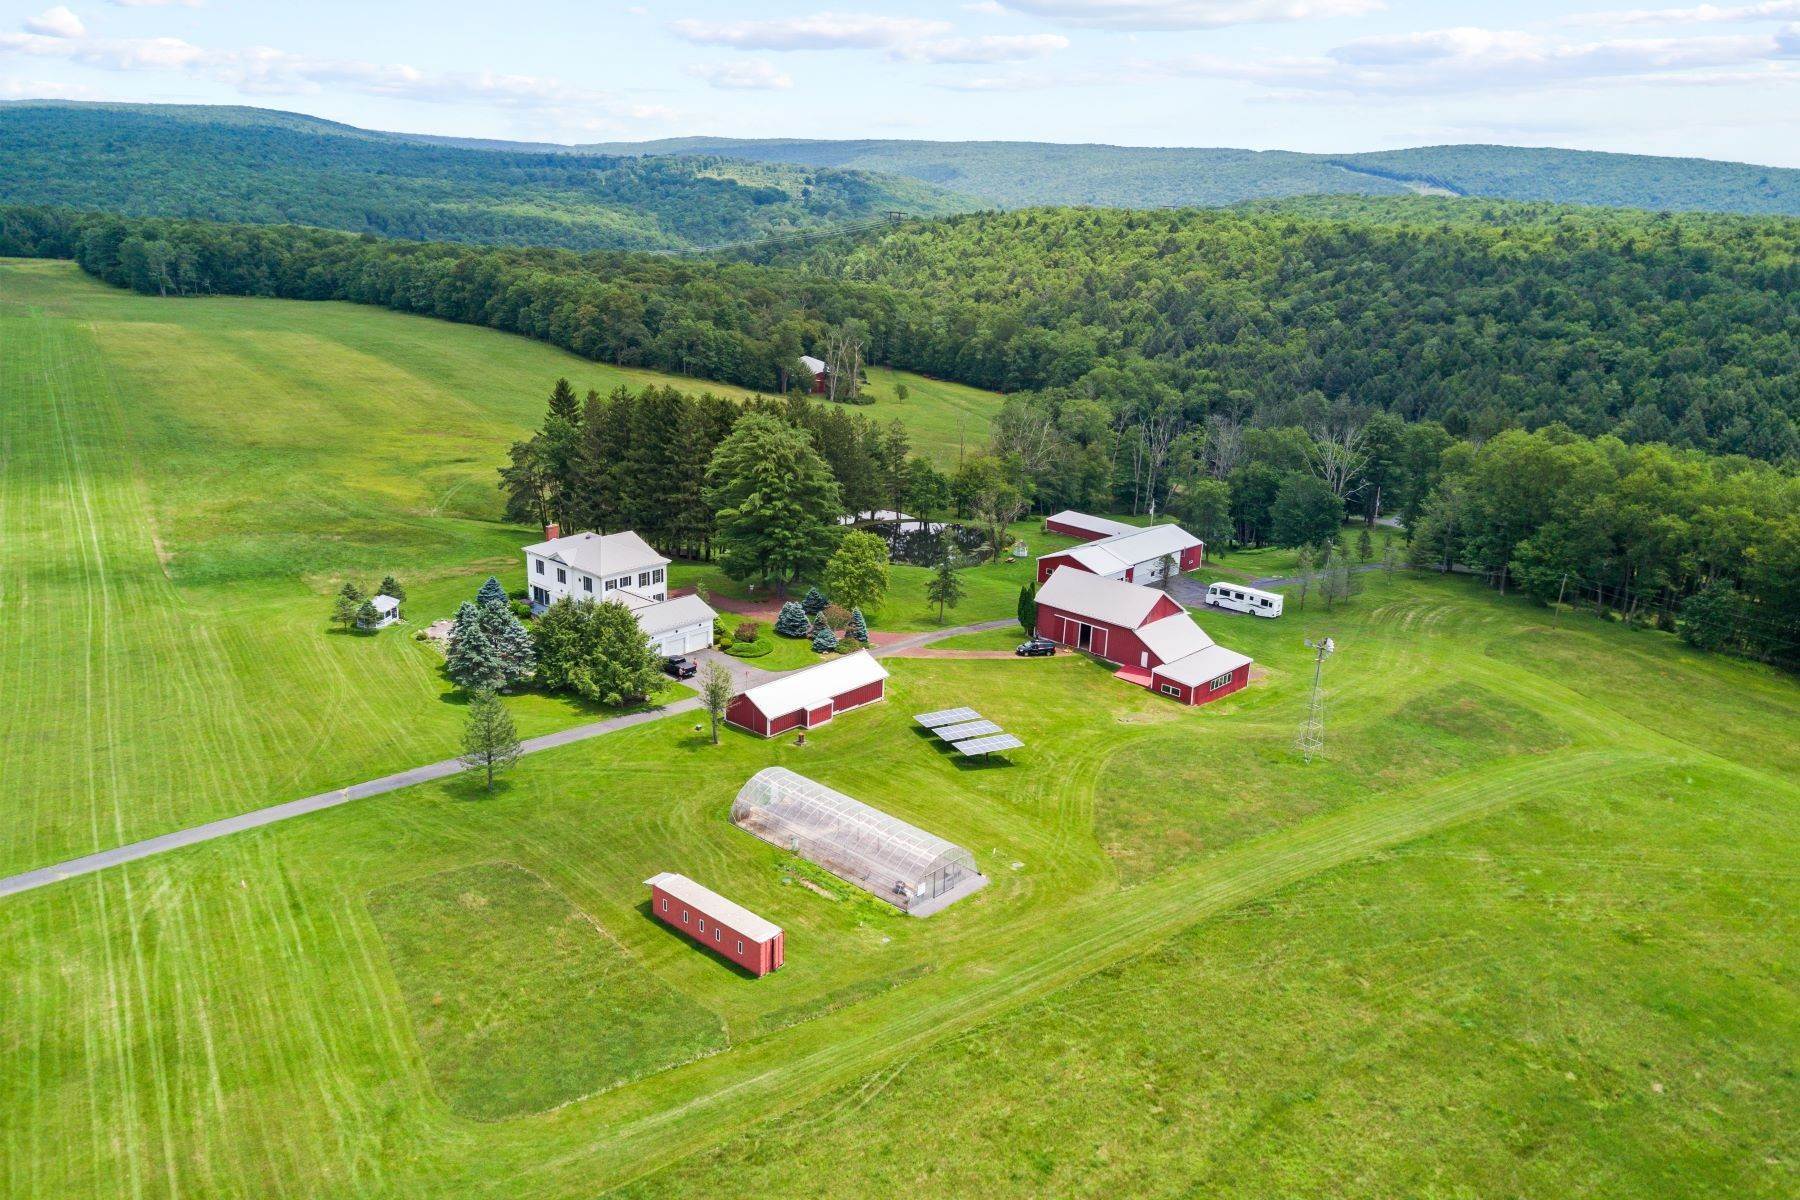 Farm and Ranch Properties for Sale at 207 Saw Mill Rd 207 Saw Mill Road Weatherly, Pennsylvania 18255 United States